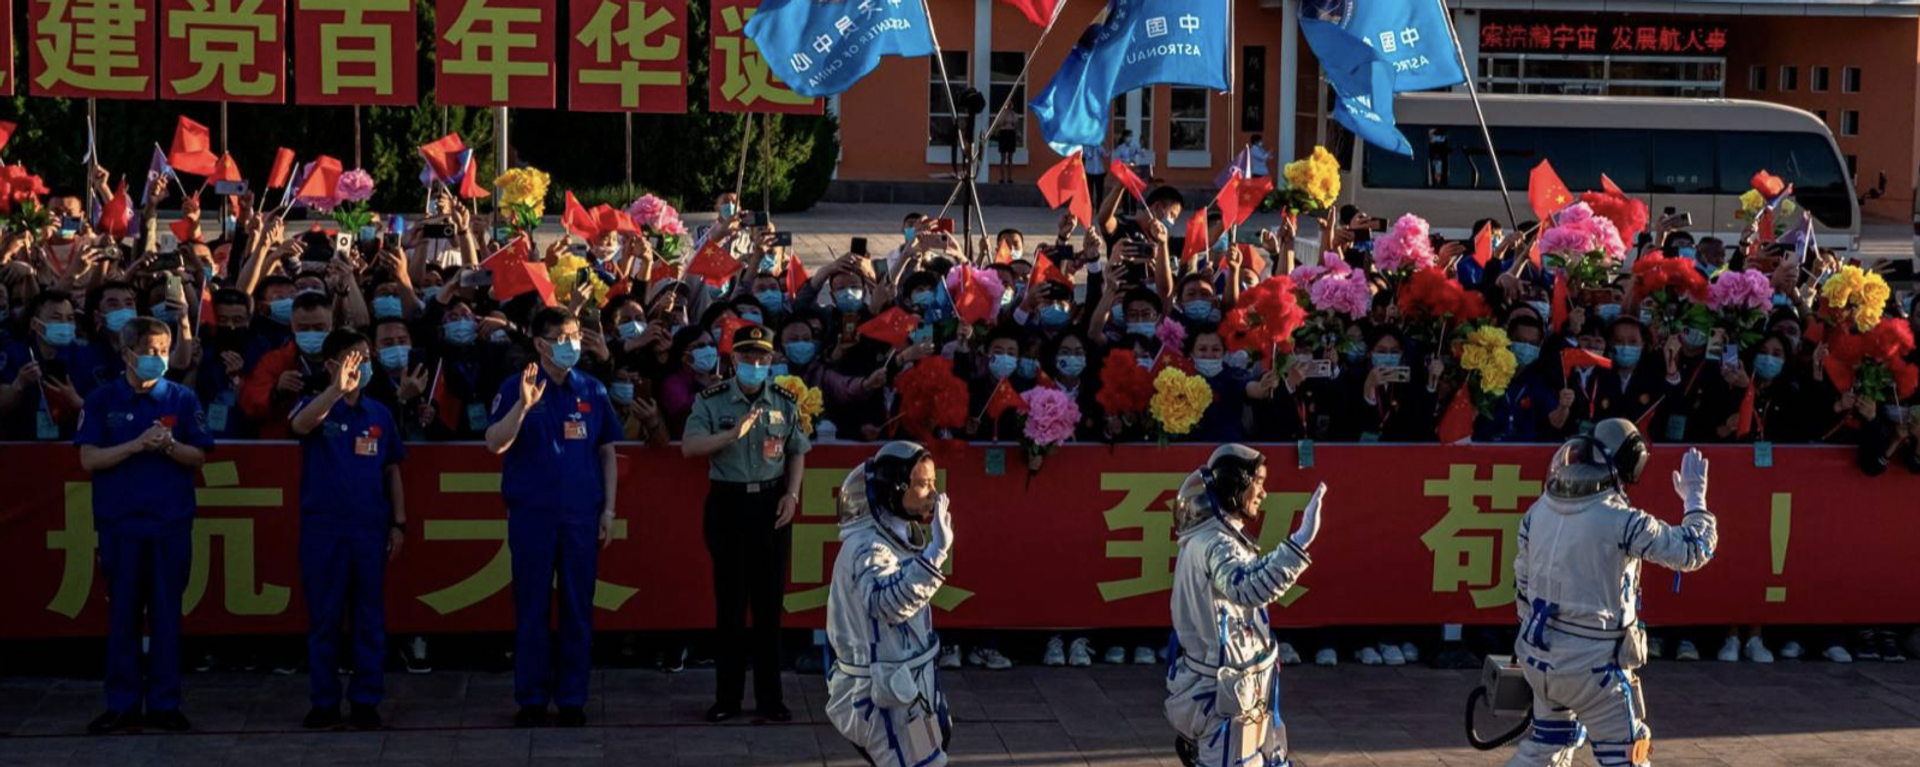 Astronauts Nie Haisheng (R), Liu Boming (C) and Tang Hongbo wave during a departure ceremony before boarding the Shenzhou-12 spacecraft on a Long March-2F carrier rocket at the Jiuquan Satellite Launch Centre in the Gobi desert, in northwest China on June 17, 2021. - 俄羅斯衛星通訊社, 1920, 29.12.2022